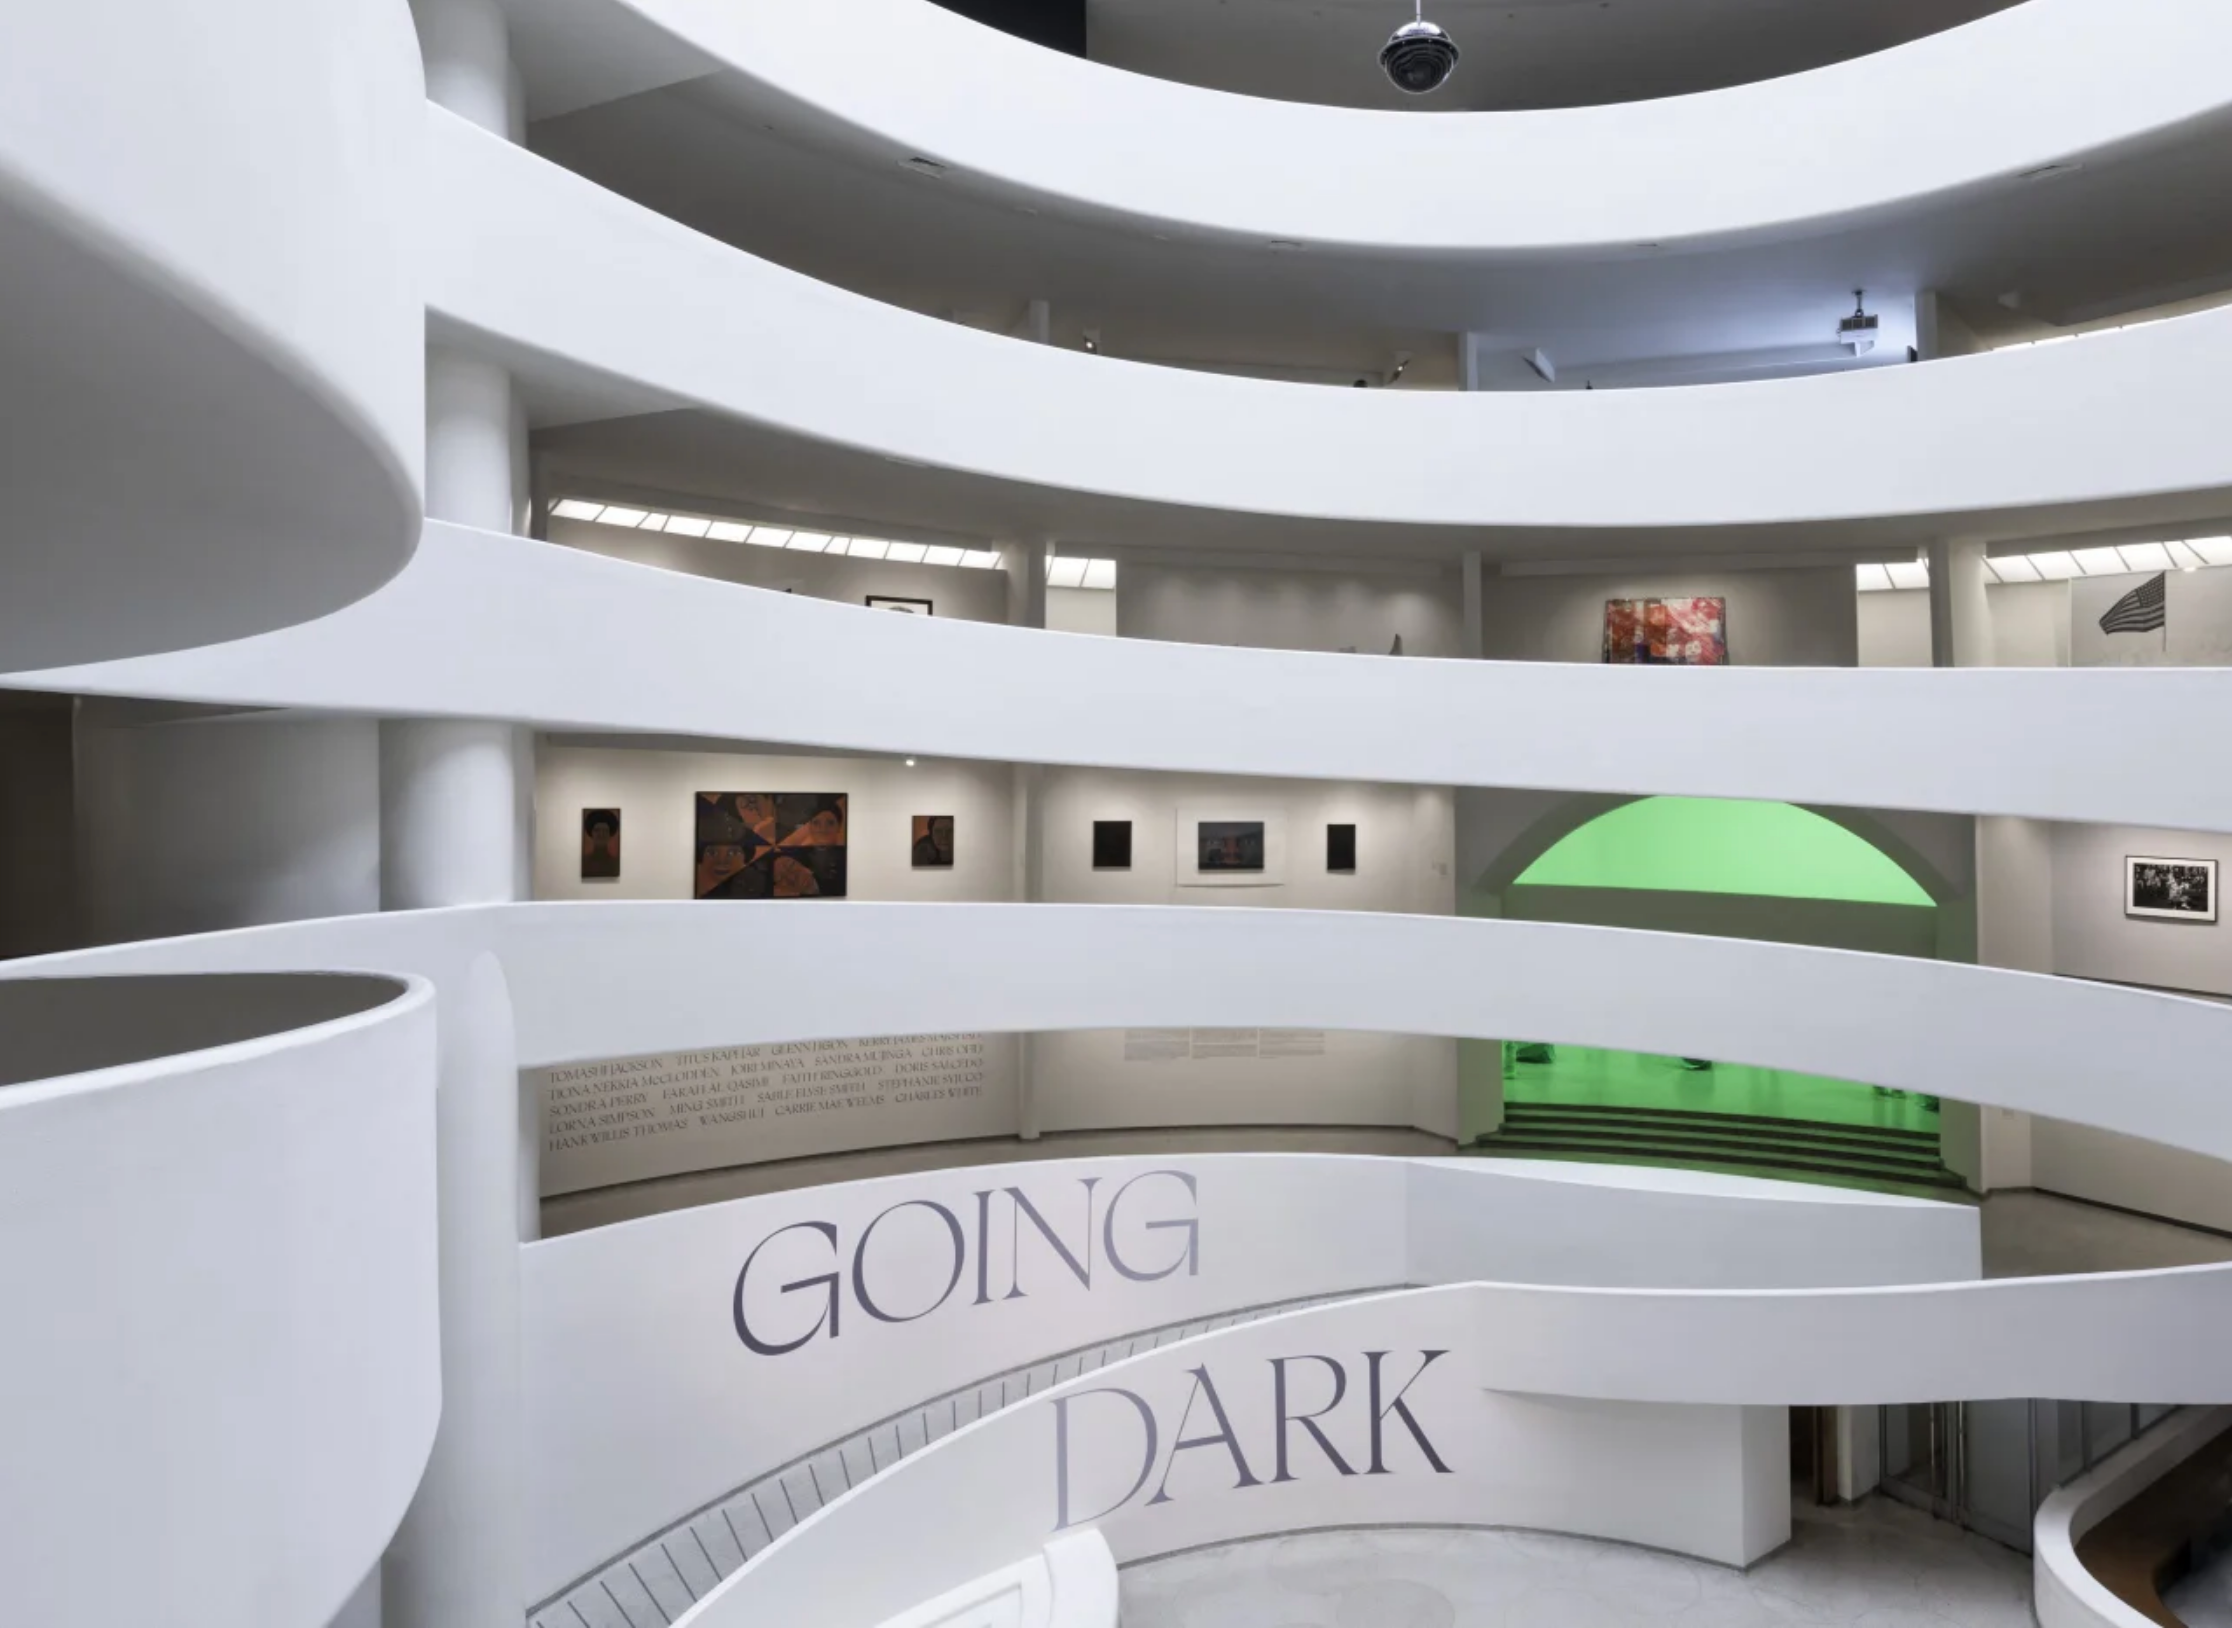 American Artist participates in "Going Dark: The Contemporary Figure at the Edge of Visibility"at the Guggenheim